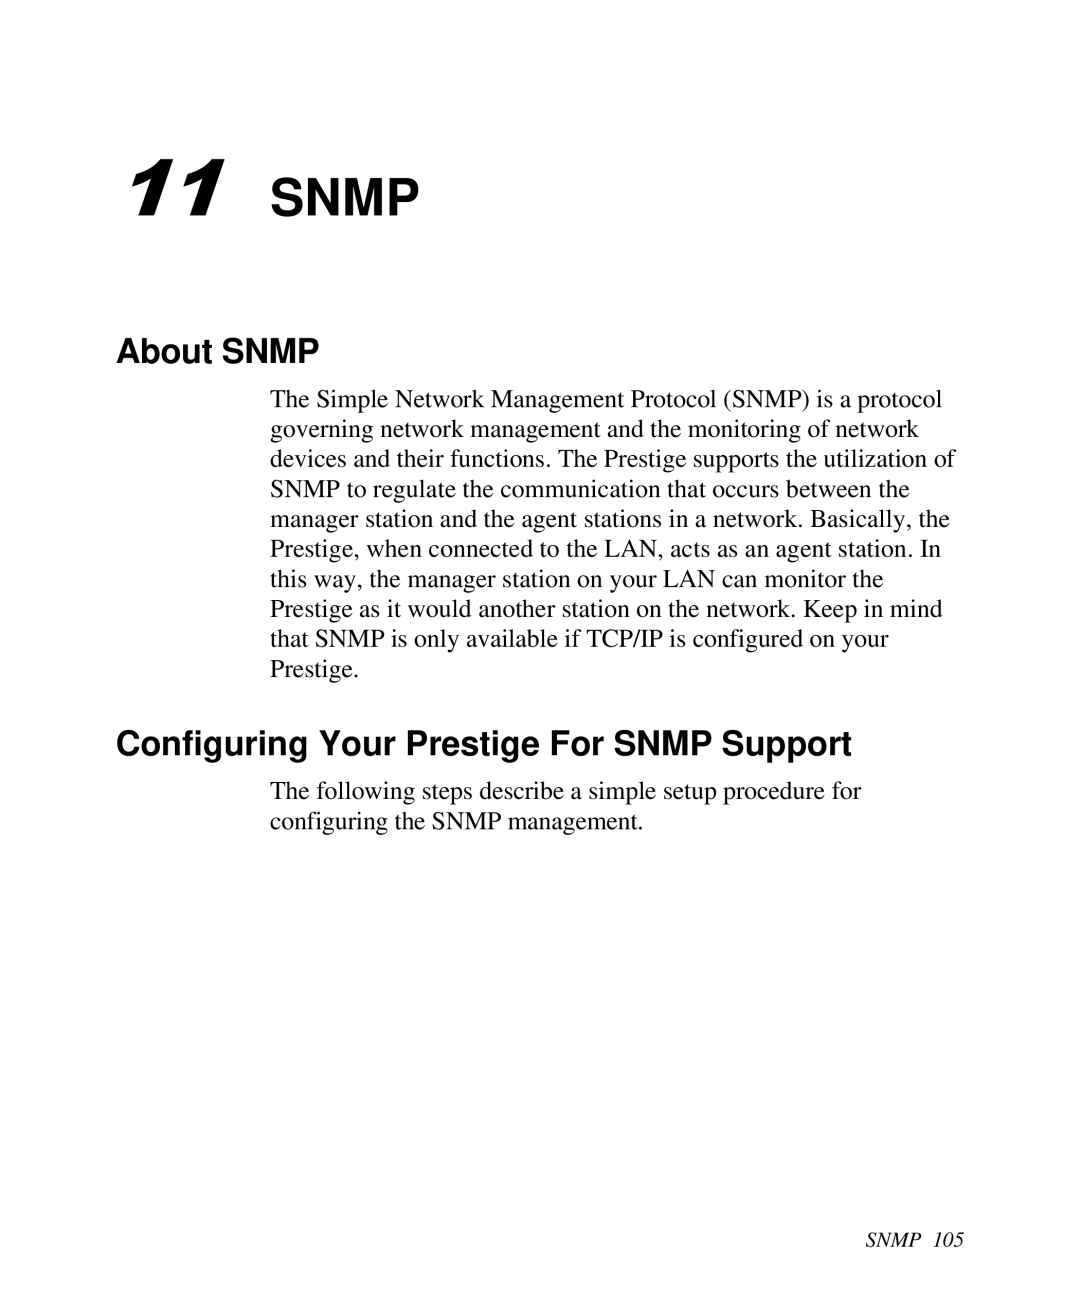 ZyXEL Communications 2864I user manual Snmp, About SNMP, Configuring Your Prestige For SNMP Support 